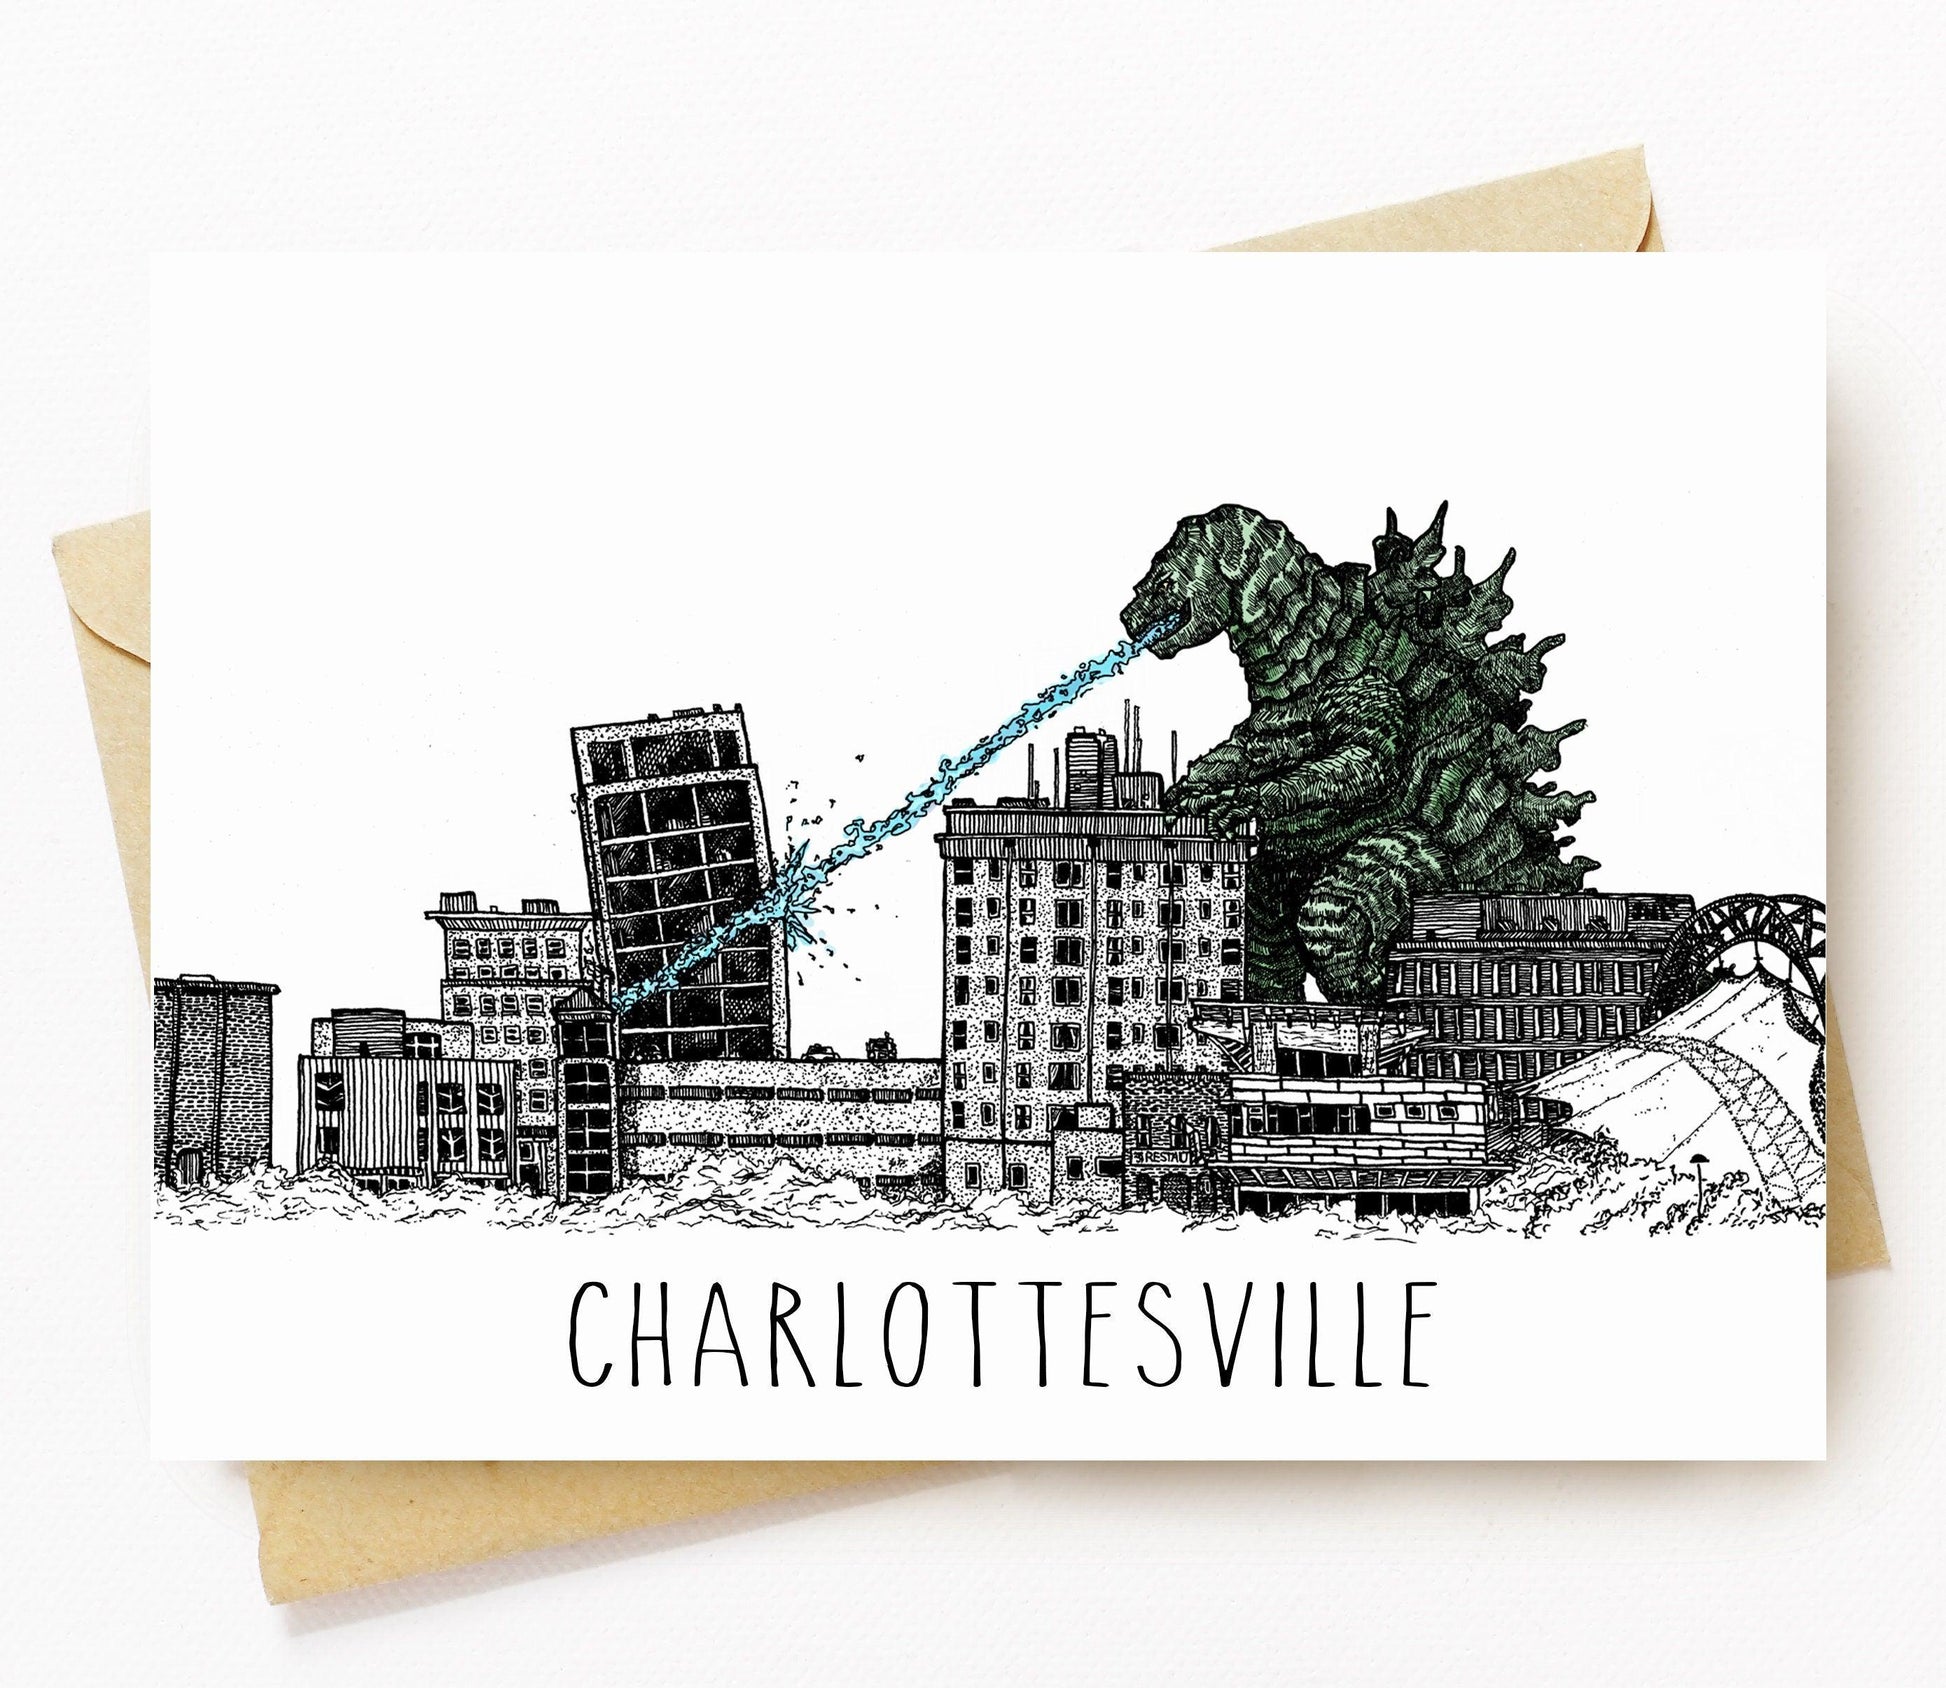 BellavanceInk: Greeting Card With A Pen & Ink Drawing Of Large Monster Attacking the Abandoned Landmark Hotel  5 x 7 Inches - BellavanceInk